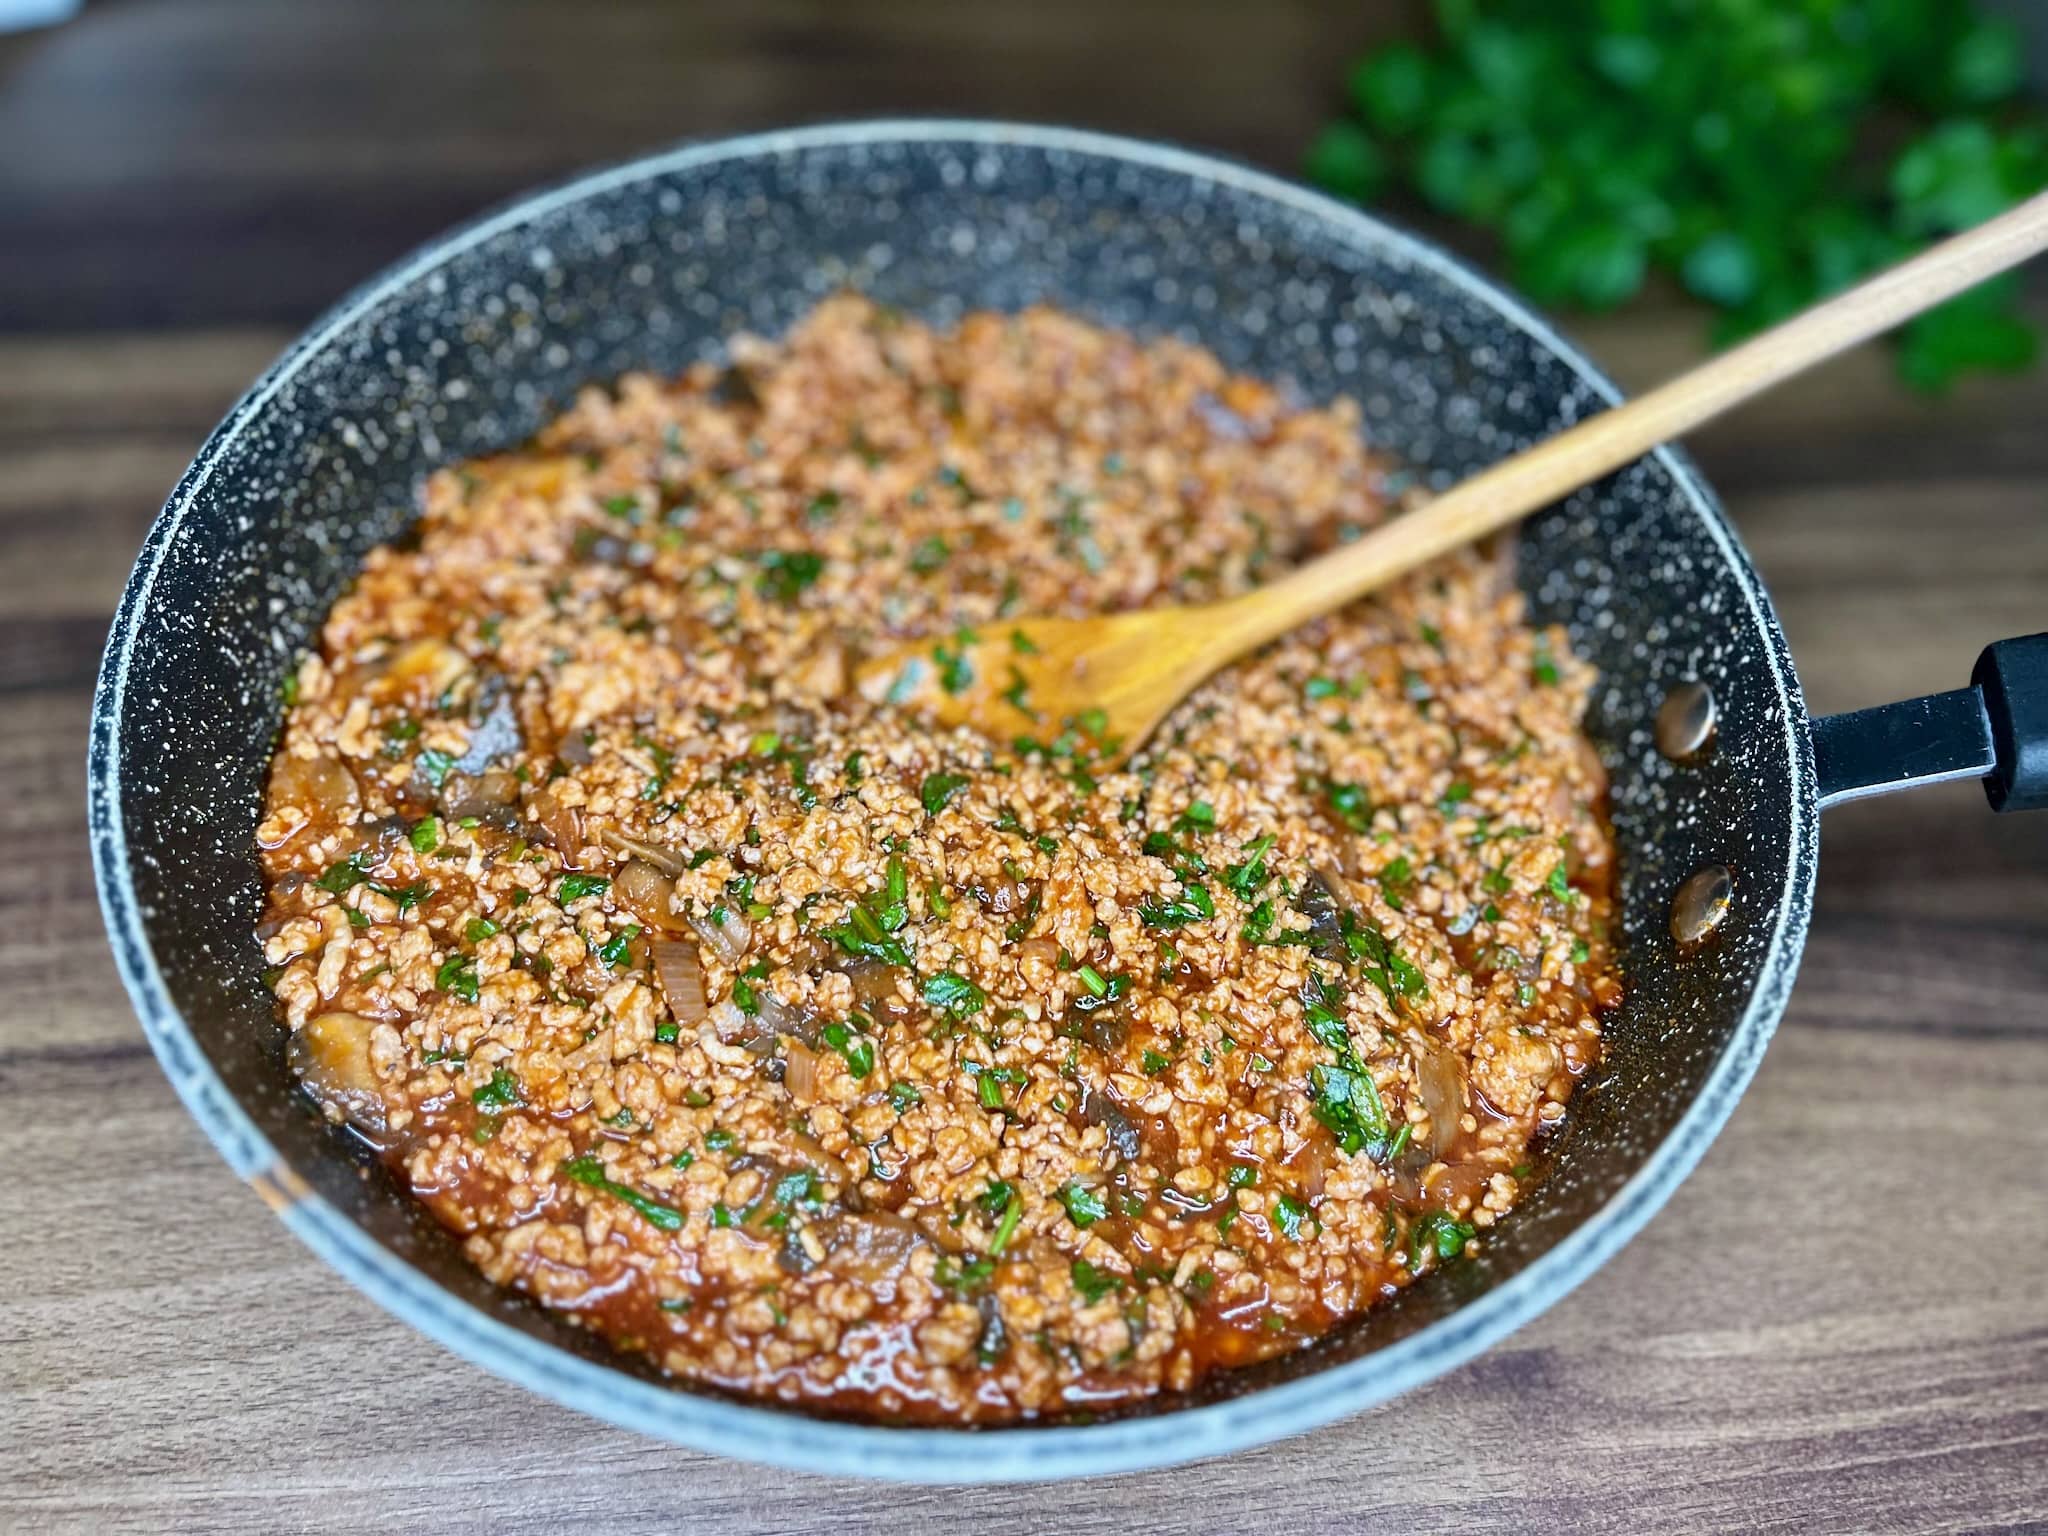 Minced pork and mushrooms with tomato passata and parsley